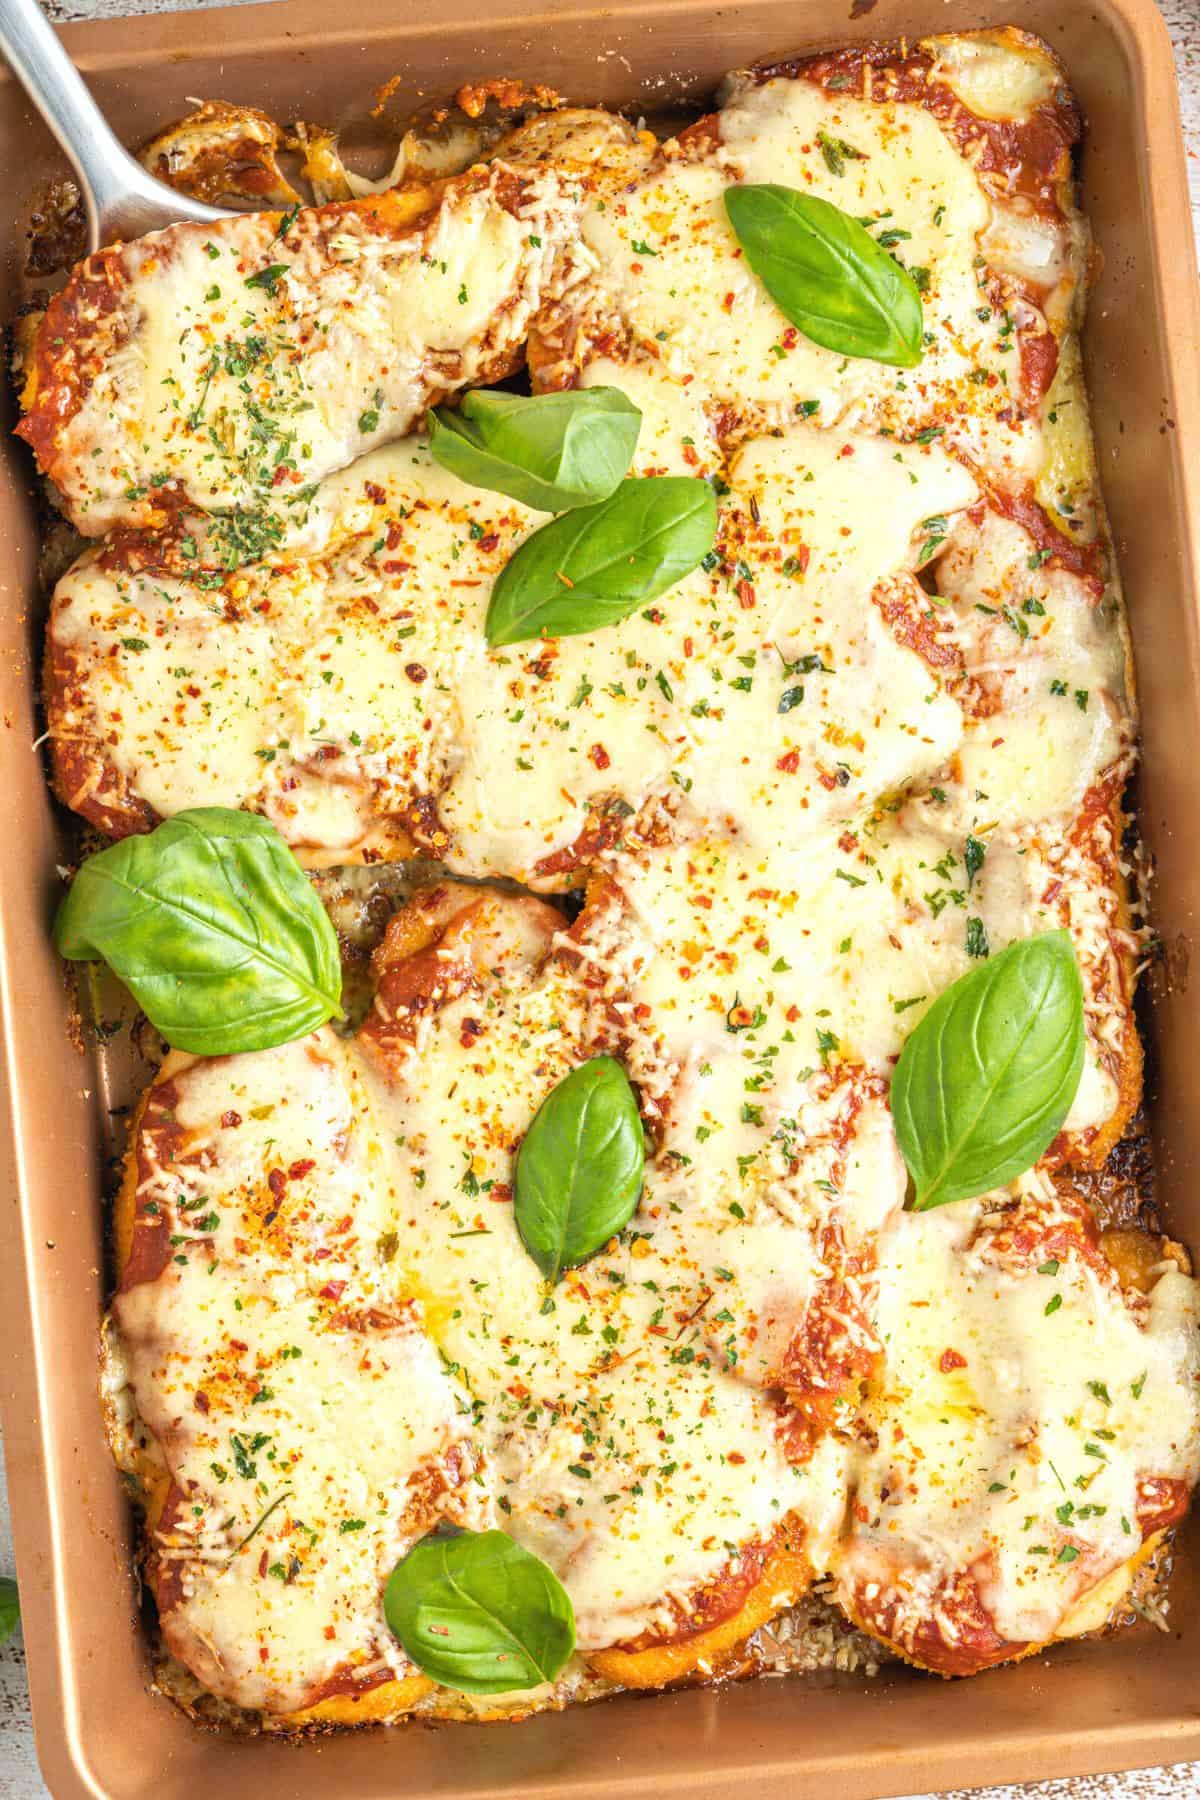 Chicken parmesan garnished with fresh basil leaves and red chili pepper flakes.